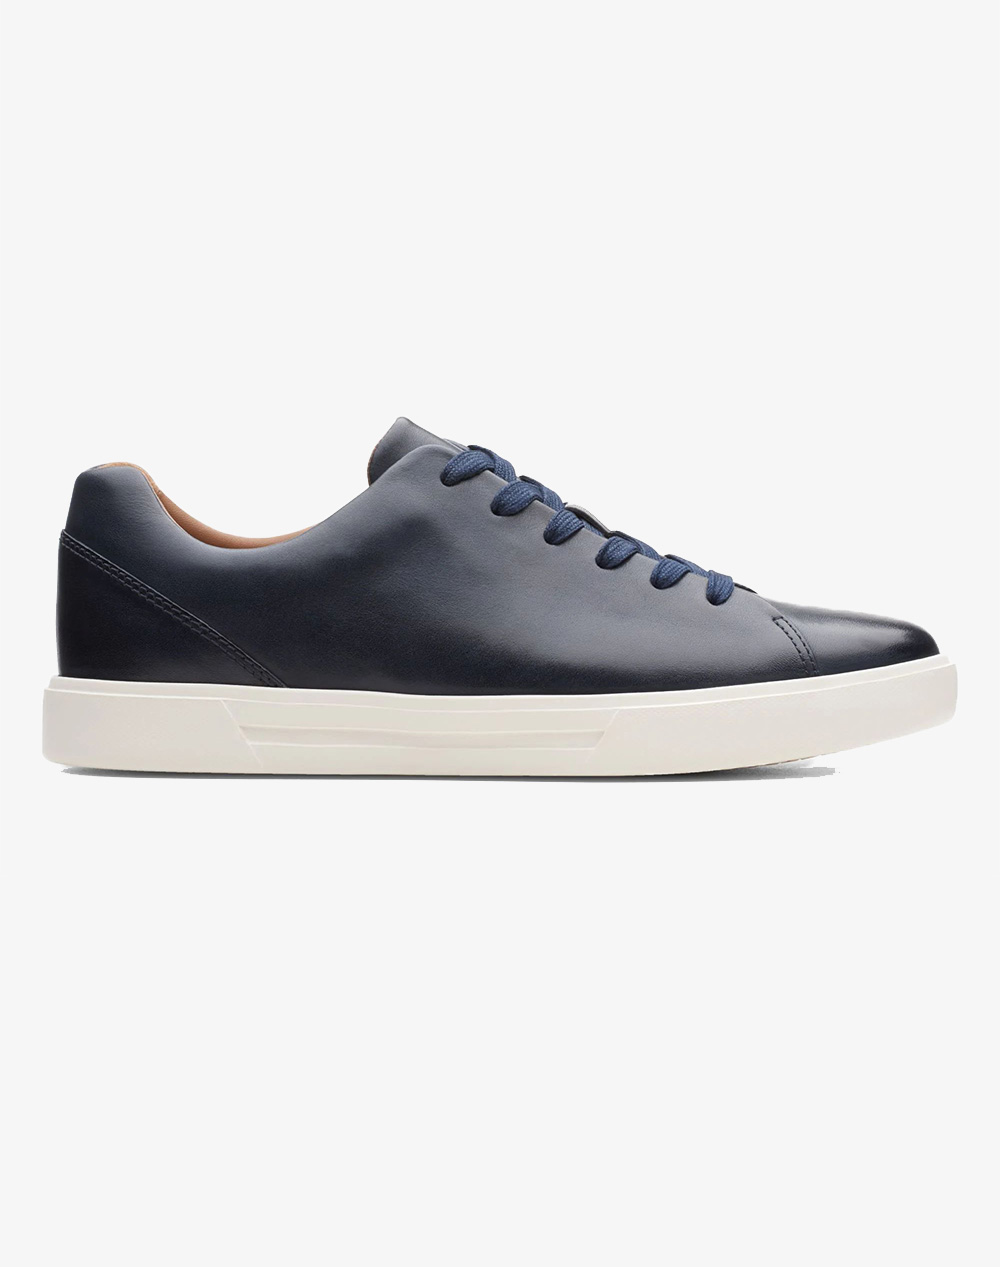 CLARKS Un Costa Lace Navy Leather 26148557-Lace DarkBlue